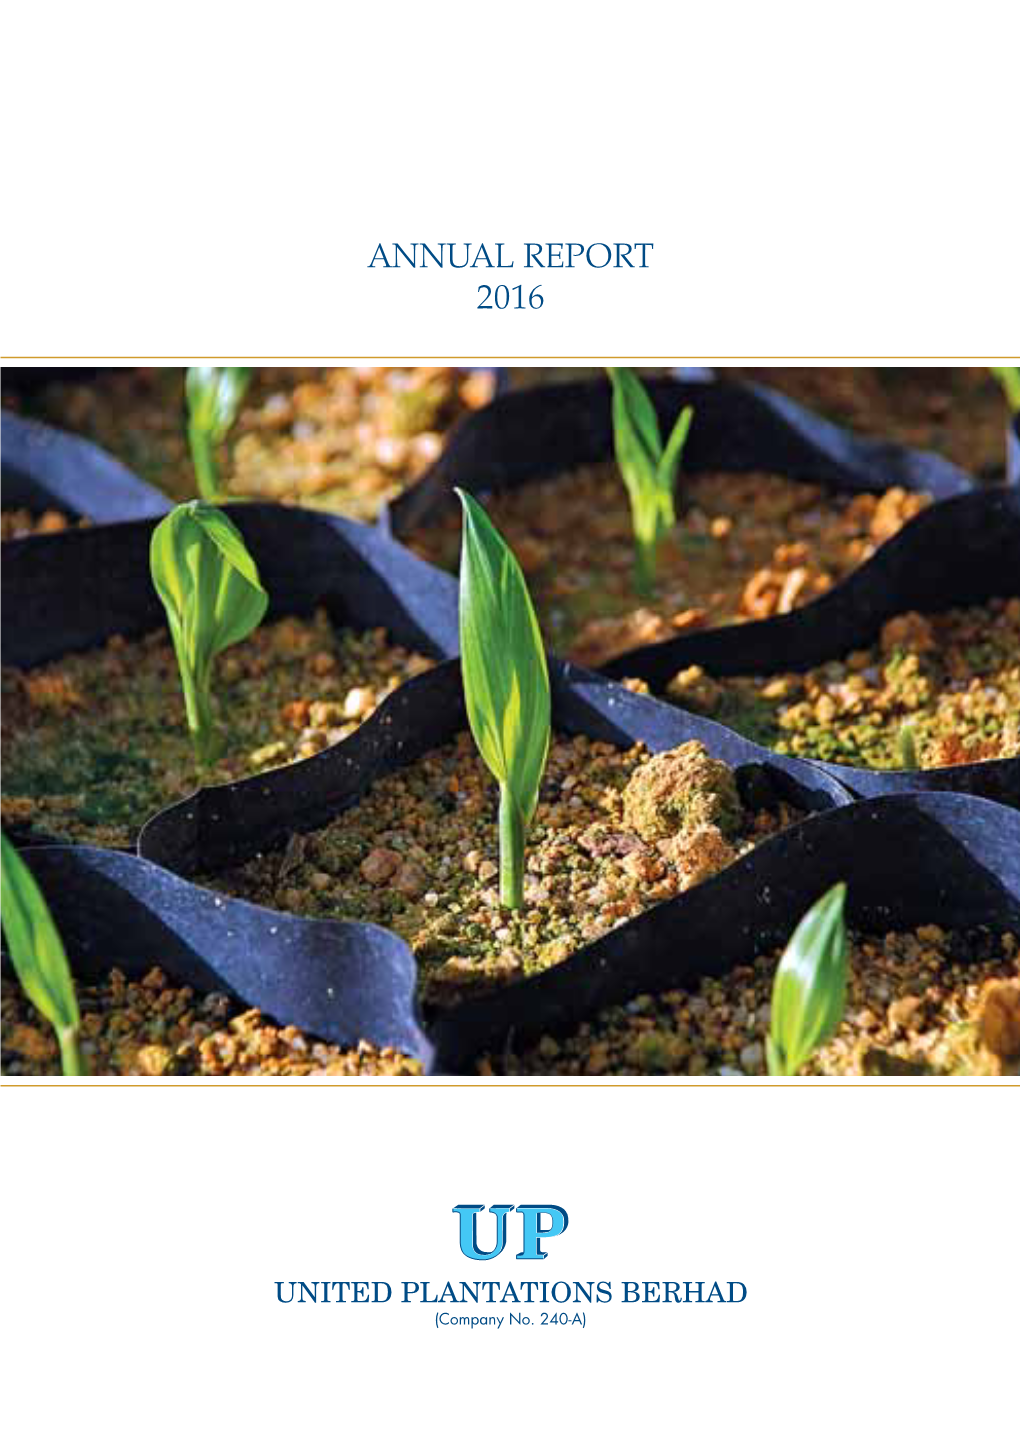 ANNUAL REPORT 2016 Brief History and Principal Business Activity